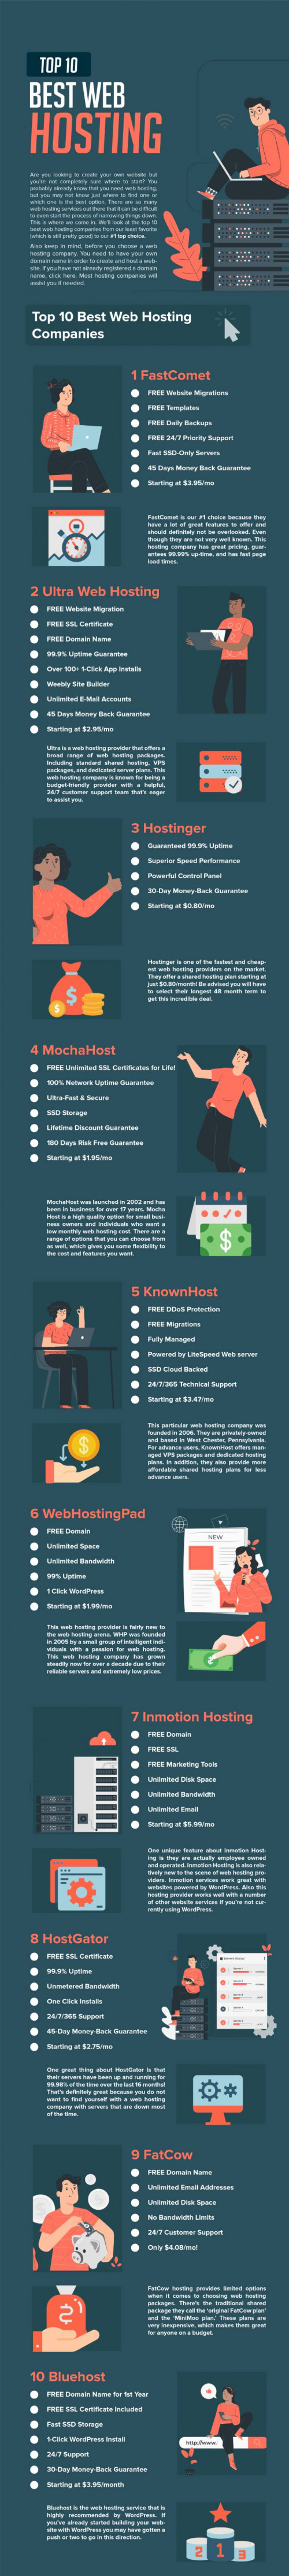 https://webhostingservice.home.blog/2019/05/07/top-10-best-web-hosting/

What is a Web Host?

On the off chance that you own a business, web facilitating is a need; it's not, at this point a discretionary extravagance. Our consistently associated world requests that business have an online page. Truth be told, even nearby physical mother and-pop shops must be discoverable by means of the web. At any rate, an organization needs a page with an area and business hours.

Why? Since informal exchange just gets you so far in the web period. Individuals find new organizations—even nearby business—by means of Bing, Google, and Yahoo. The days when they'd simply find you in the business directory are a distant memory. On the off chance that you don't have a sharable site address, your odds of building on the web verbal exchange by means of long range interpersonal communication plunge, as well. As it were, no site, no discoverability, no cash. Obviously, web facilitating isn't only for organizations. You might need to have an individual site or blog, as well. In any case, the administrations here have you secured.

The initial phase in building your online nearness is finding a web have, the organization that will store your site's records on its servers and convey them to your perusers' and clients' programs. Bluehost, a PC Mag Business Choice victor, is a peruser suggested alternative.

Web facilitating administrations offer fluctuating measures of month to month information moves, stockpiling, email, and different highlights. Indeed, even how you pay (month-to-month installments versus yearly installments) can be fundamentally extraordinary, as well, so setting aside the effort to plot precisely what your organization requirements for online achievement is basic. A considerable lot of these organizations likewise offer affiliate facilitating administrations, which let you start a new business for yourself, offering facilitating to your own clients without expecting you to turn up your own servers.

You ought to likewise acclimate yourself with the many web facilitating levels that are accessible. In your examination, you'll find shared, virtual private server (VPS), devoted facilitating, and WordPress facilitating plans. Every level offers various specs and highlights that you should set aside the effort to break down. I'll separate them.

What Is Shared Web Hosting?

Common facilitating is web facilitating in which the supplier houses numerous destinations on a solitary server. For instance, Site An offers a similar server with Site B, Site C, Site D, and Site E. The upside is that the various locales share the server cost, so shared web facilitating is commonly extremely modest. Indeed, you can discover a possibility for under $10 every month.

You could think about the destinations that share your server as your flat mates; there's truly not that much isolating you from them. Certainly, you can close the room entryway, yet they can at present reason bad dreams for you in the kitchen and the washroom. In web facilitating terms, all the destinations share a solitary server's assets, so enormous traffic spike nearby A may affect the neighboring locales' exhibitions. It's even conceivable that another site could bring down the mutual server out and out, on the off chance that it slammed hard enough.

What Is VPS Web Hosting?

VPS facilitating is like mutual facilitating in that different locales share a similar server, however the similitudes end there. A devoted web have houses less destinations per server than is the situation with shared facilitating, and each webpage has its own individual assets.

lodging terms, VPS facilitating resembles leasing your own loft in a bigger structure. You're considerably more disengaged than in the flat mate circumstance referenced over; it's as yet conceivable that a neighboring loft could causes irritation for you, yet far more outlandish. In web facilitating terms, Site A's traffic flood won't have close to as much effect nearby B or Site C. As you'd expect, VPS facilitating costs more than shared facilitating. You'll pay generally $20 to $60 every month.

What Is Dedicated Web Hosting?

Devoted facilitating, then again, is both ground-breaking and expensive. It's held for destinations that require a unimaginable measure of server assets.

In contrast to shared or VPS facilitating, committed facilitating makes your site the solitary occupant on a server. To expand the lodging representation, having a devoted server resembles possessing your own home. The implies that your site taps the server's full force, and pays for the benefit. In case you're searching for a powerful webpage—an online manor for your business—committed facilitating is the best approach. All things considered, many devoted web facilitating administrations task you with taking care of backend, specialized issues, much as mortgage holders have oversee upkeep that leaseholders for the most part leave to their proprietors.

On the subject of devoted facilitating, many web facilitating administrations likewise offer oversaw facilitating. This sort of facilitating sees the web have go about as your IT division, taking care of a server's support and upkeep. This facilitating choice is something that you'd commonly find with committed servers, so it's a business-driven expansion. Normally, it adds a couple of bucks to the facilitating cost, however nothing that should burn up all available resources in the event that you have the assets for a committed server.

Business Hosting

At the point when it's an ideal opportunity to open for business, search for a web have that offers the previously mentioned committed servers, just as cutting edge cloud server stages, (for example, Amazon Web Services or Google Cloud), custom server constructs should you need it, and day in and day out client service. Contingent upon your business' center, you may require a web have that can deal with site visits or guests that position up in the thousands or millions. Many caught up with facilitating plans offer an onboarding expert that can assist you with beginning, as well.

In case you're anticipating selling an item, search for a web have that offers a Secure Sockets Layer (SSL) endorsement, since it scrambles the information between the client's program and web host to shield buying data. You're most likely acquainted with SSL; it's the green latch that shows up in your internet browser's location bar as you visit an online money related organization or retail outlet. A couple of organizations hurl in a SSL authentication for nothing out of pocket; others may charge you generally $100 every year for that additional security layer.

What Is WordPress Web Hosting?

WordPress facilitating is for individuals who need to fabricate their destinations on the rear of the mainstream WordPress content administration framework (CMS) from WordPress.org. There are different approaches to open for business utilizing this free, open-source blogging and website building stage.

You gain the most web-building usefulness in the event that you make a self-facilitated webpage. This regularly includes transfering the free WordPress CMS to server or pursuing a web host's improved WordPress plan. With an upgraded arrangement, the host naturally handles backend stuff, so you don't need to stress over refreshing the modules and CMS, and empowering programmed reinforcements. In these cases, the WordPress condition commonly comes pre-introduced on the server.

You can likewise have your site on WordPress.com, however that is unique in relation to the sort of facilitating referenced previously. WordPress.com utilizes a similar code from WordPress.org, yet it conceals the server code and handles the facilitating for you. In that sense, it looks like sections in our online website developer roundup. It's a less complex however less adaptable and adjustable approach to approach WordPress facilitating. It's certainly simpler, however in the event that you need to dabble and modify and streamline each part of your site, it probably won't be for you.